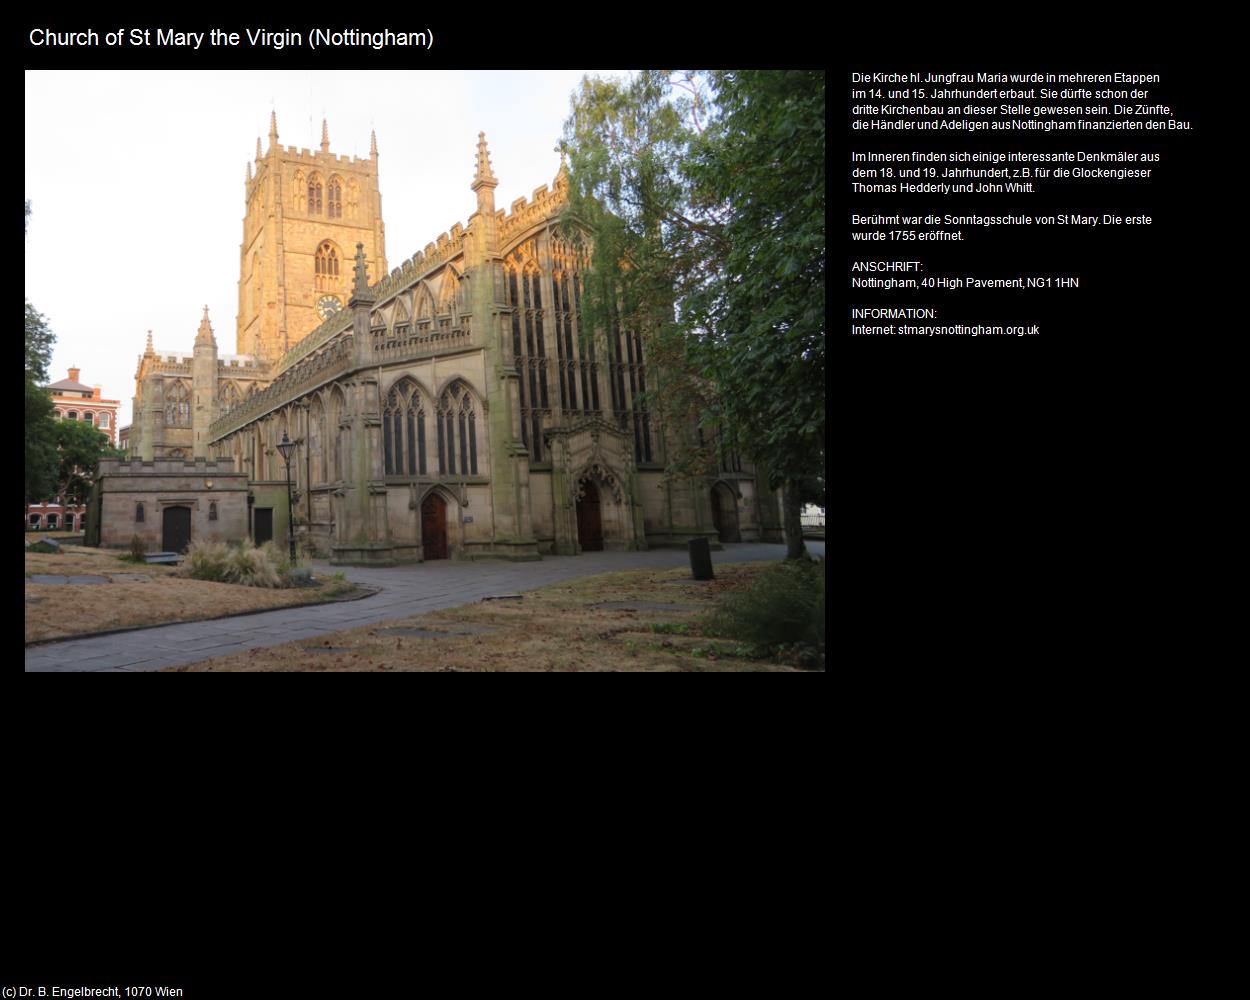 Church of St Mary the Virgin  (Nottingham) in Kulturatlas-ENGLAND und WALES